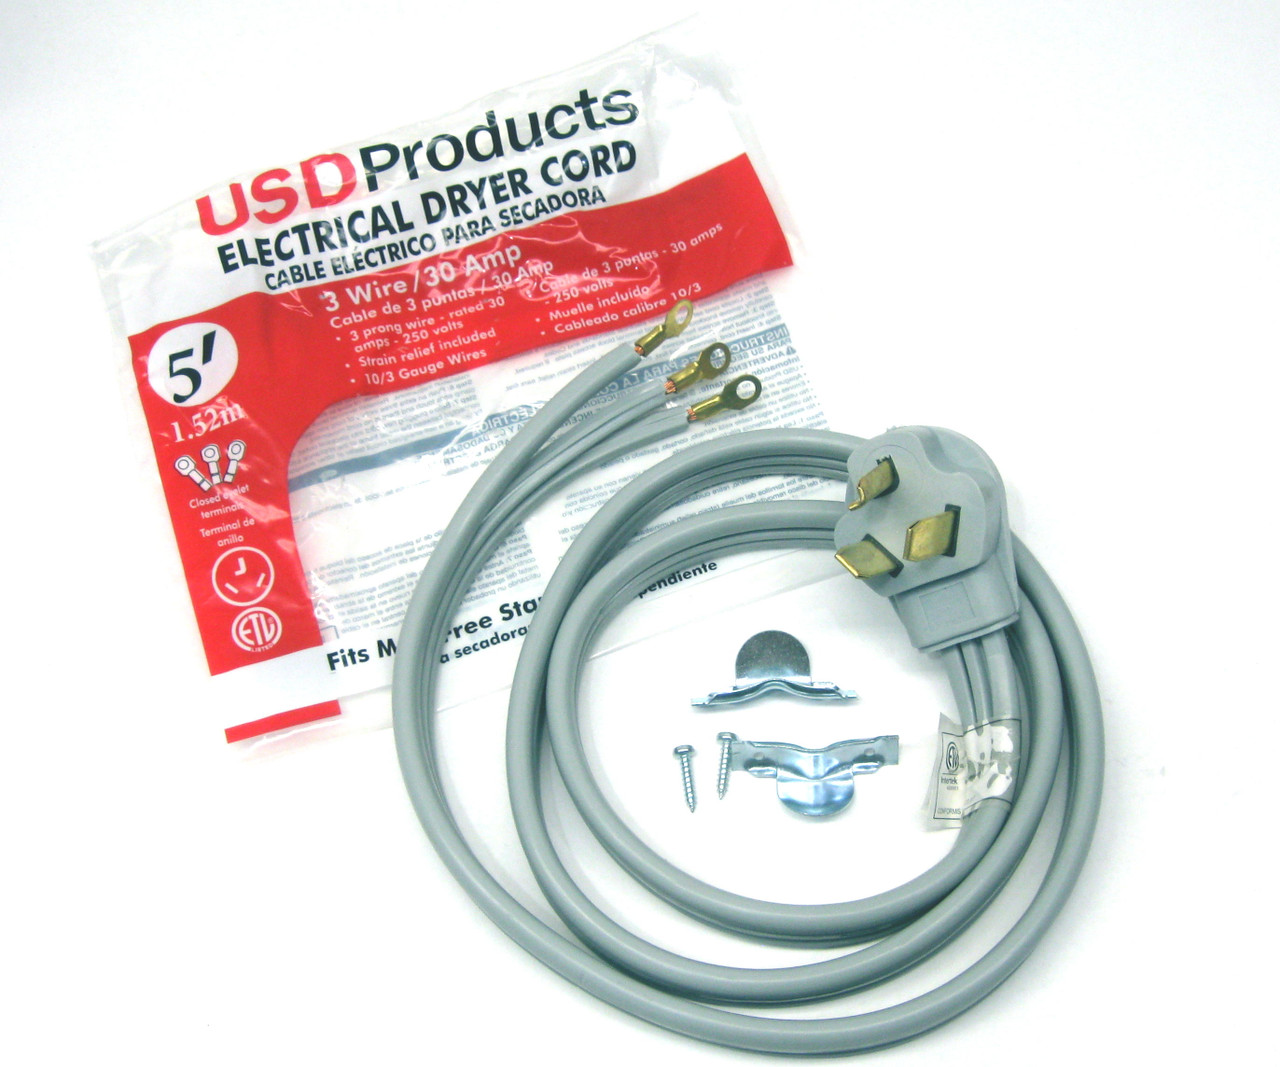 Clothes Dryer Power Cord 3 Prong Wire 30 Amp 5' Foot 10/3 Gauge Wire Heavy Duty